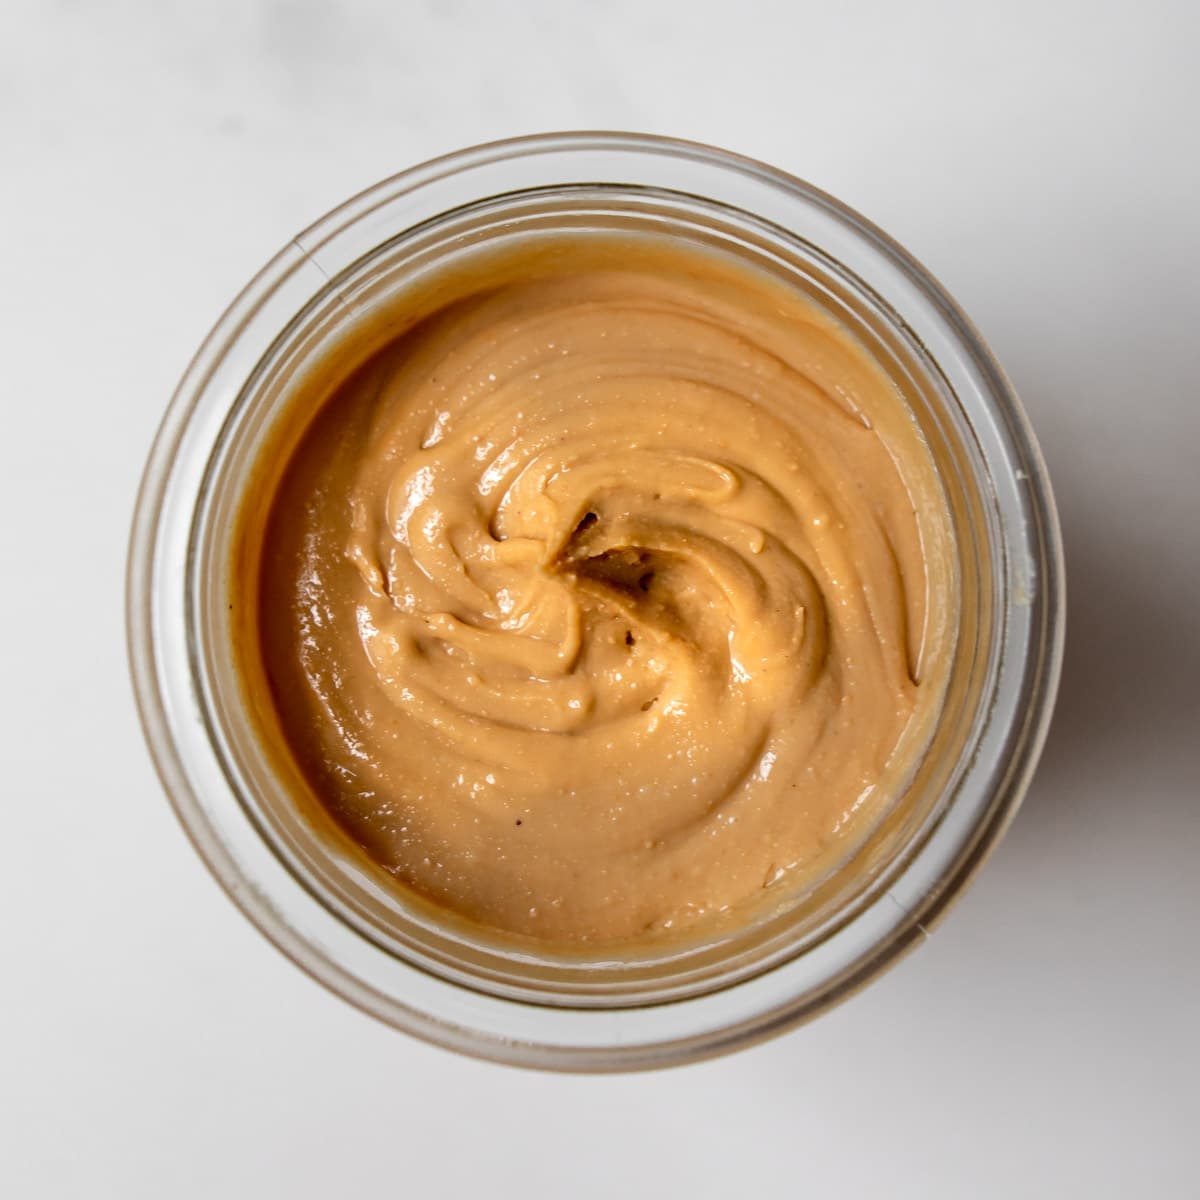 Overhead close-up view of homemade cashew butter in a glass jar.